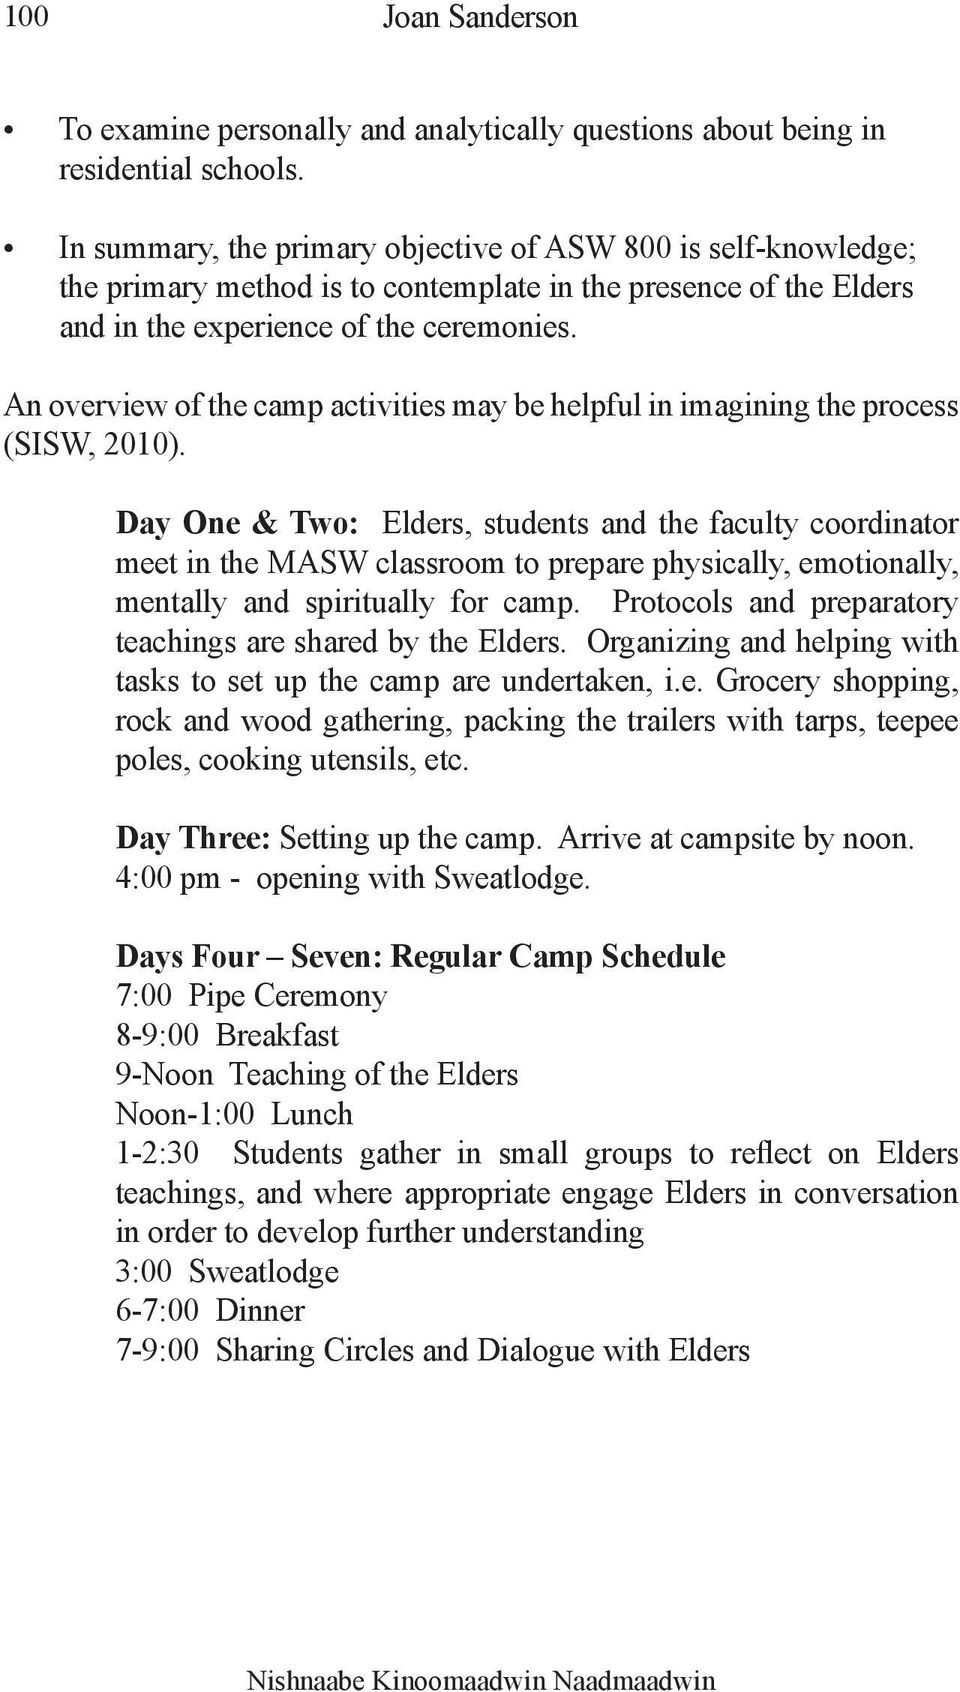 An overview of the camp activities may be helpful in imagining the process (SISW, 2010).